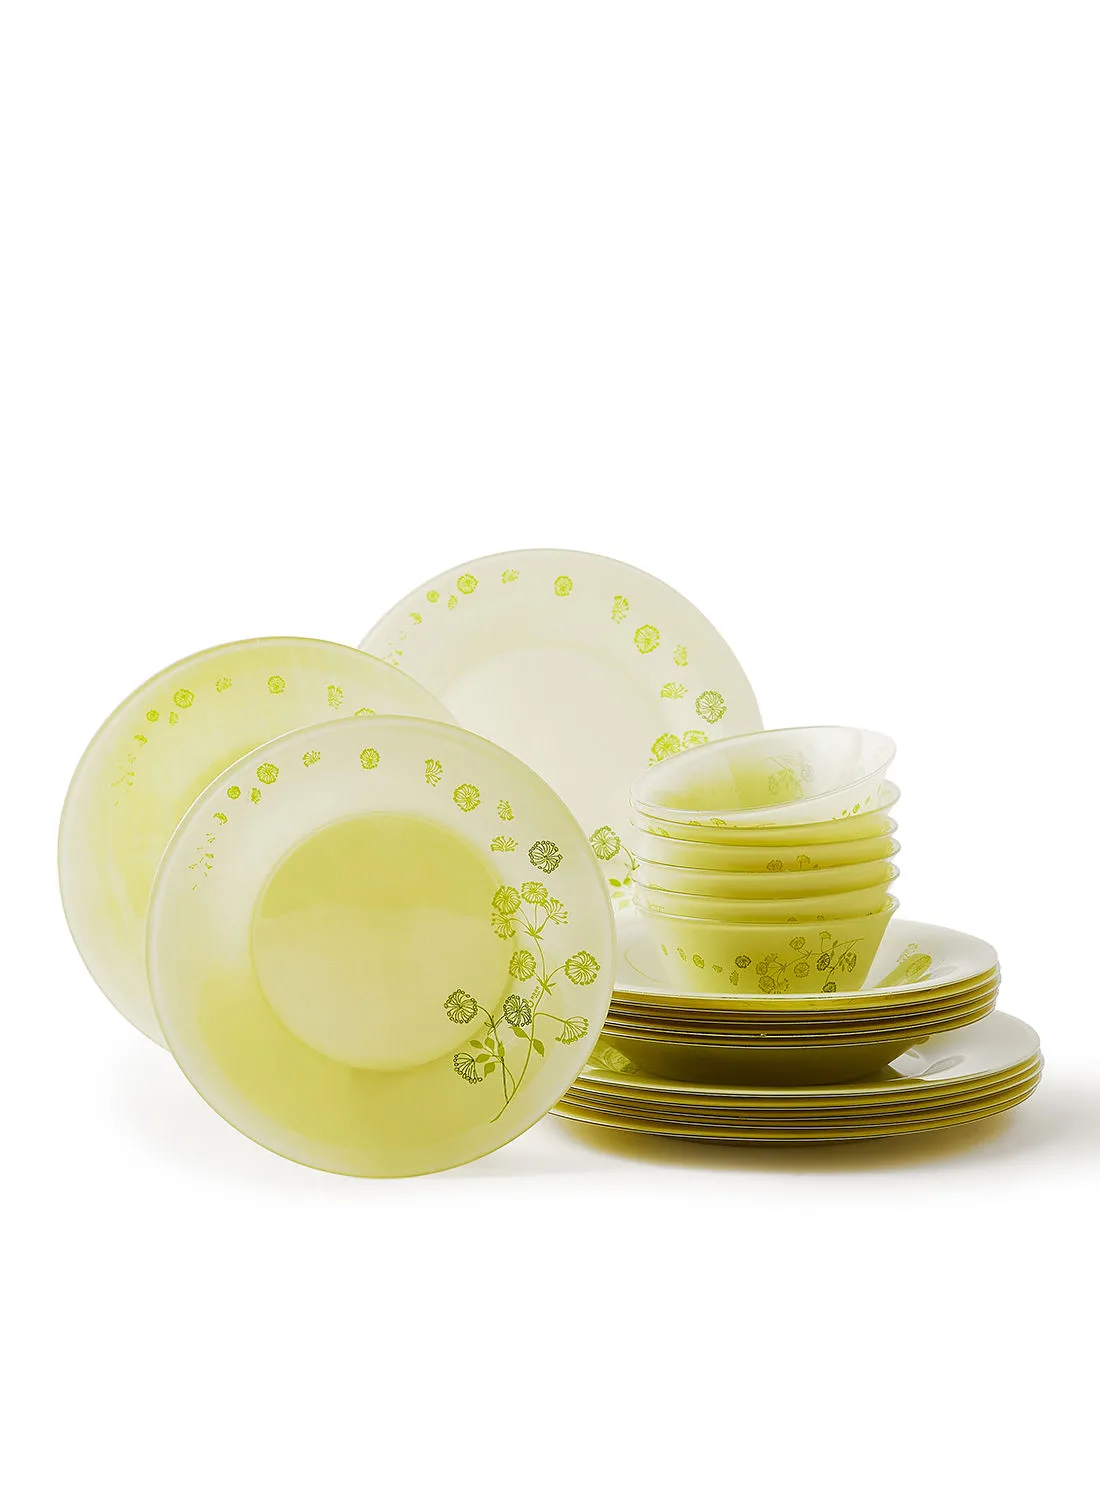 noon east 24 Piece Glass Dinner Set For Everyday Use - Light Weight Dishes, Plates - Dinner Plate, Side Plate, Bowl - Serves 6 - Printed Design Atlantique